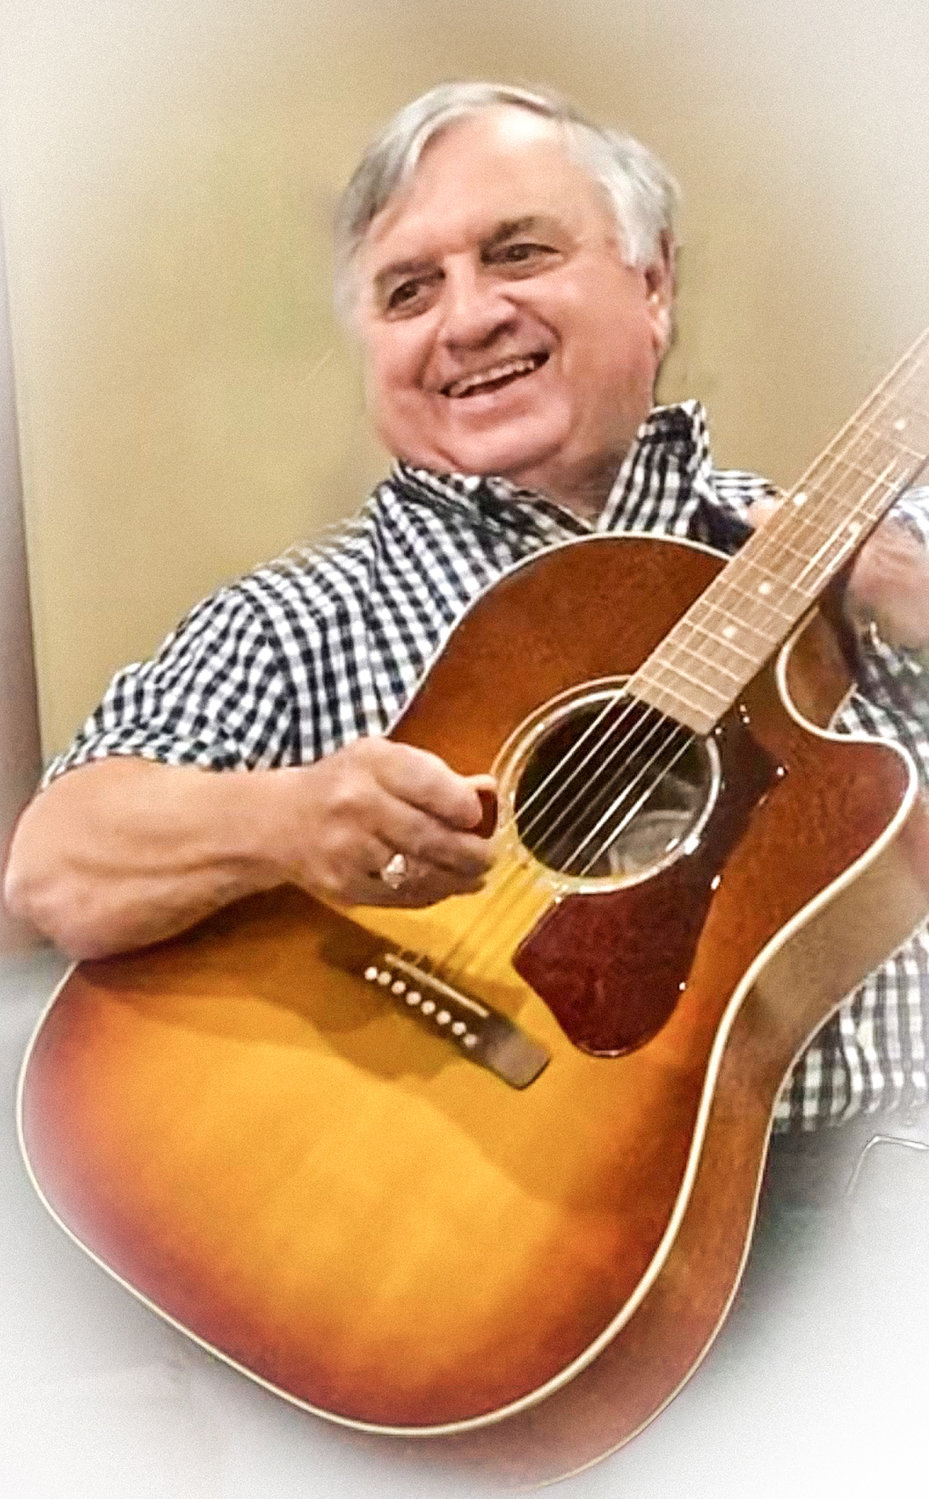 Bill Morris, who died Dec. 17, was a gifted musician. His family has designated memorials to the Bothwell Foundation to purchase AEDs for the community.